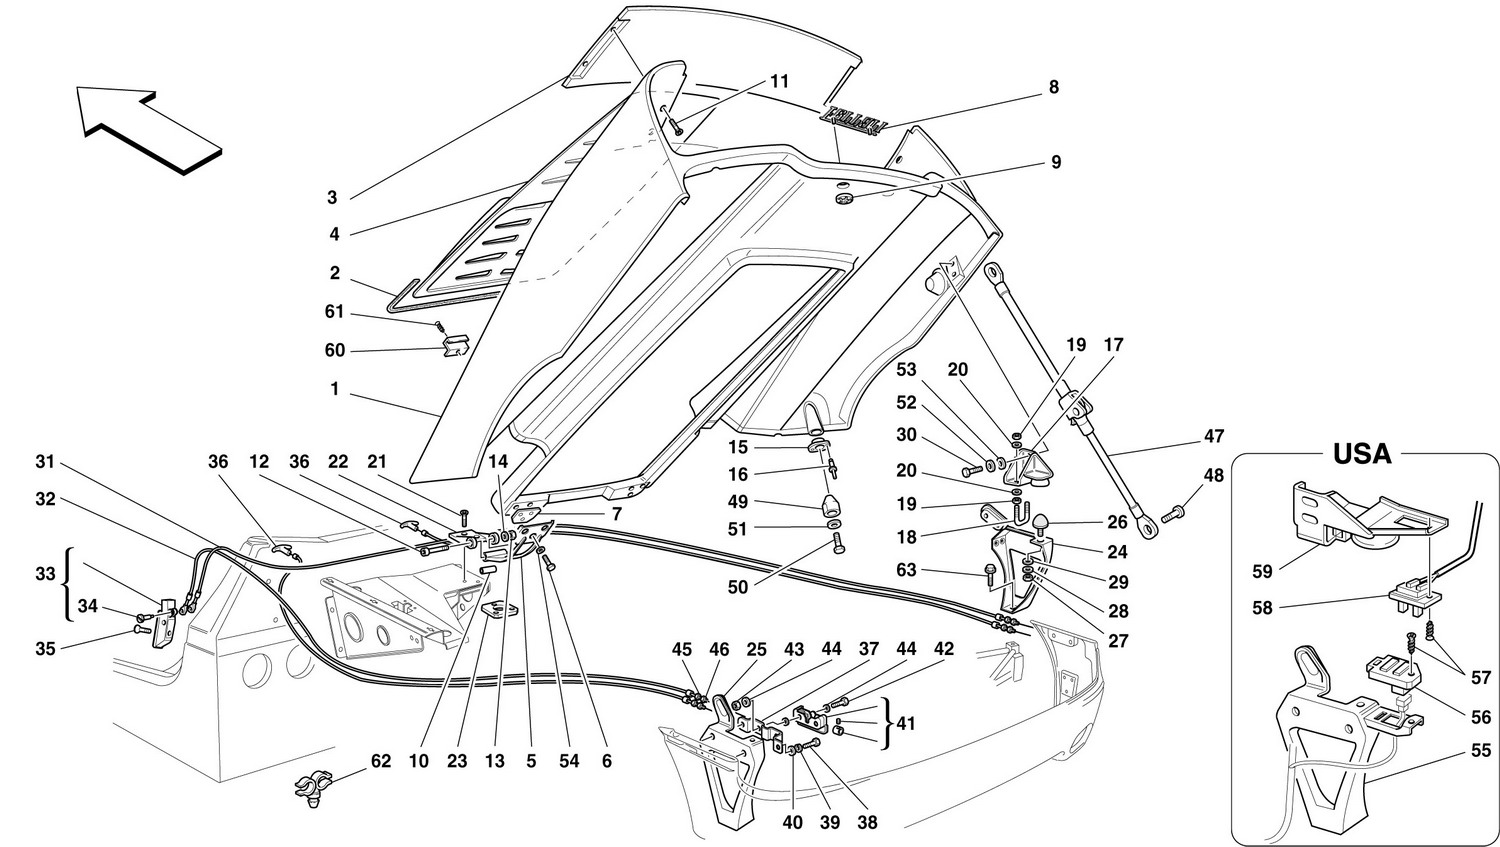 Schematic: Rear Hood And Opening Controls